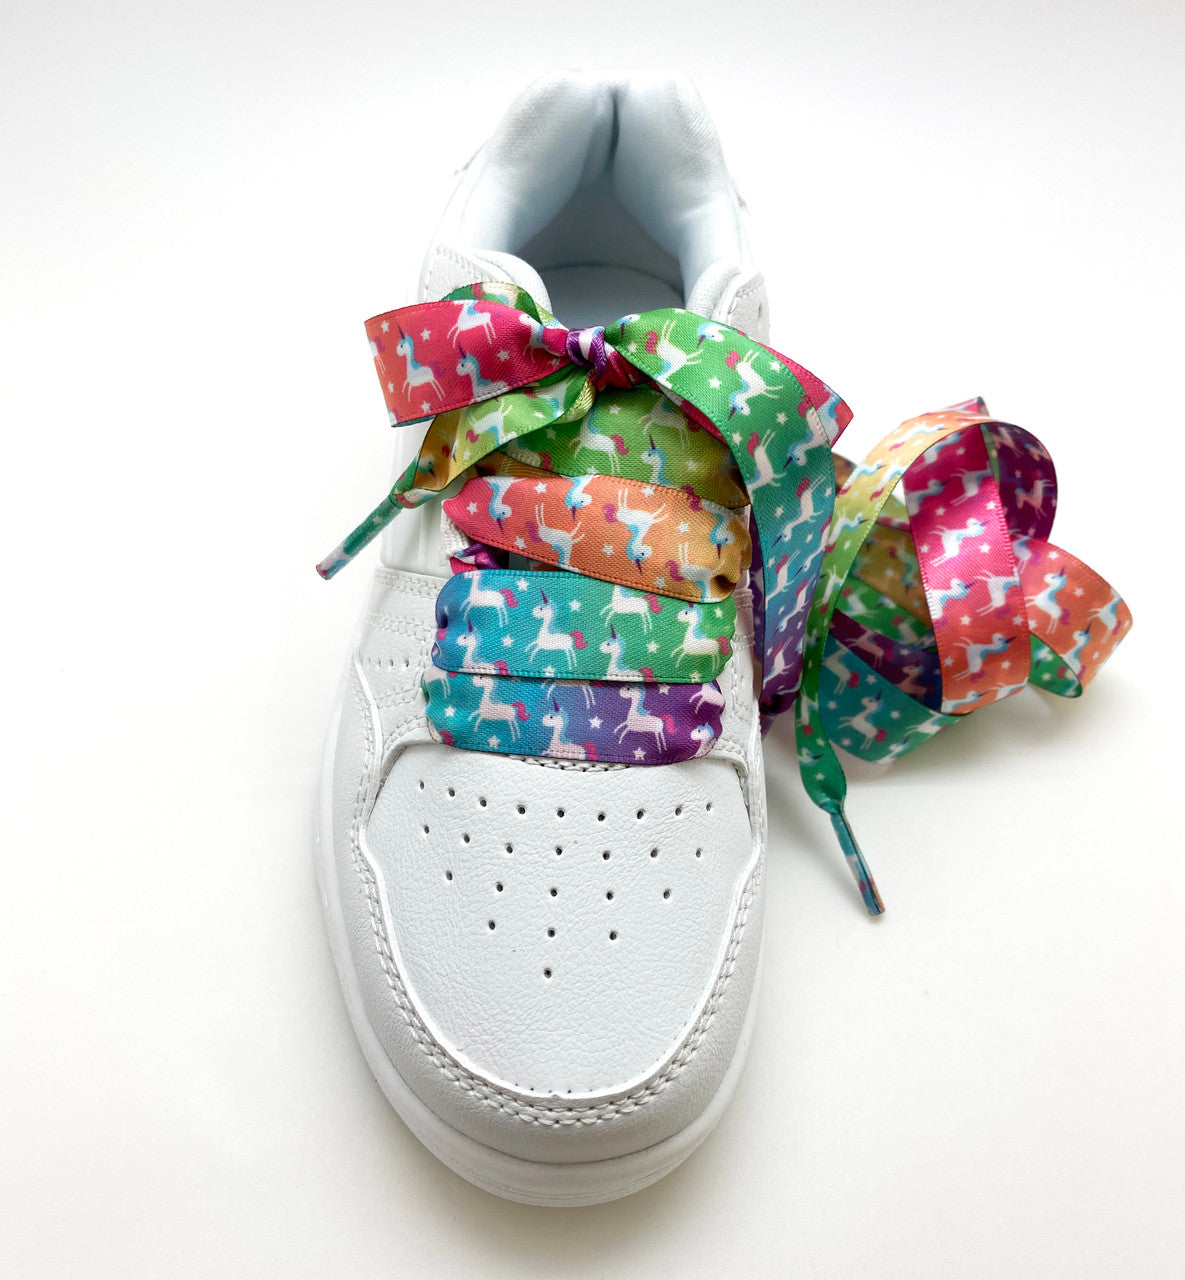 Lace your shoes with  our fun Unicorn print design!